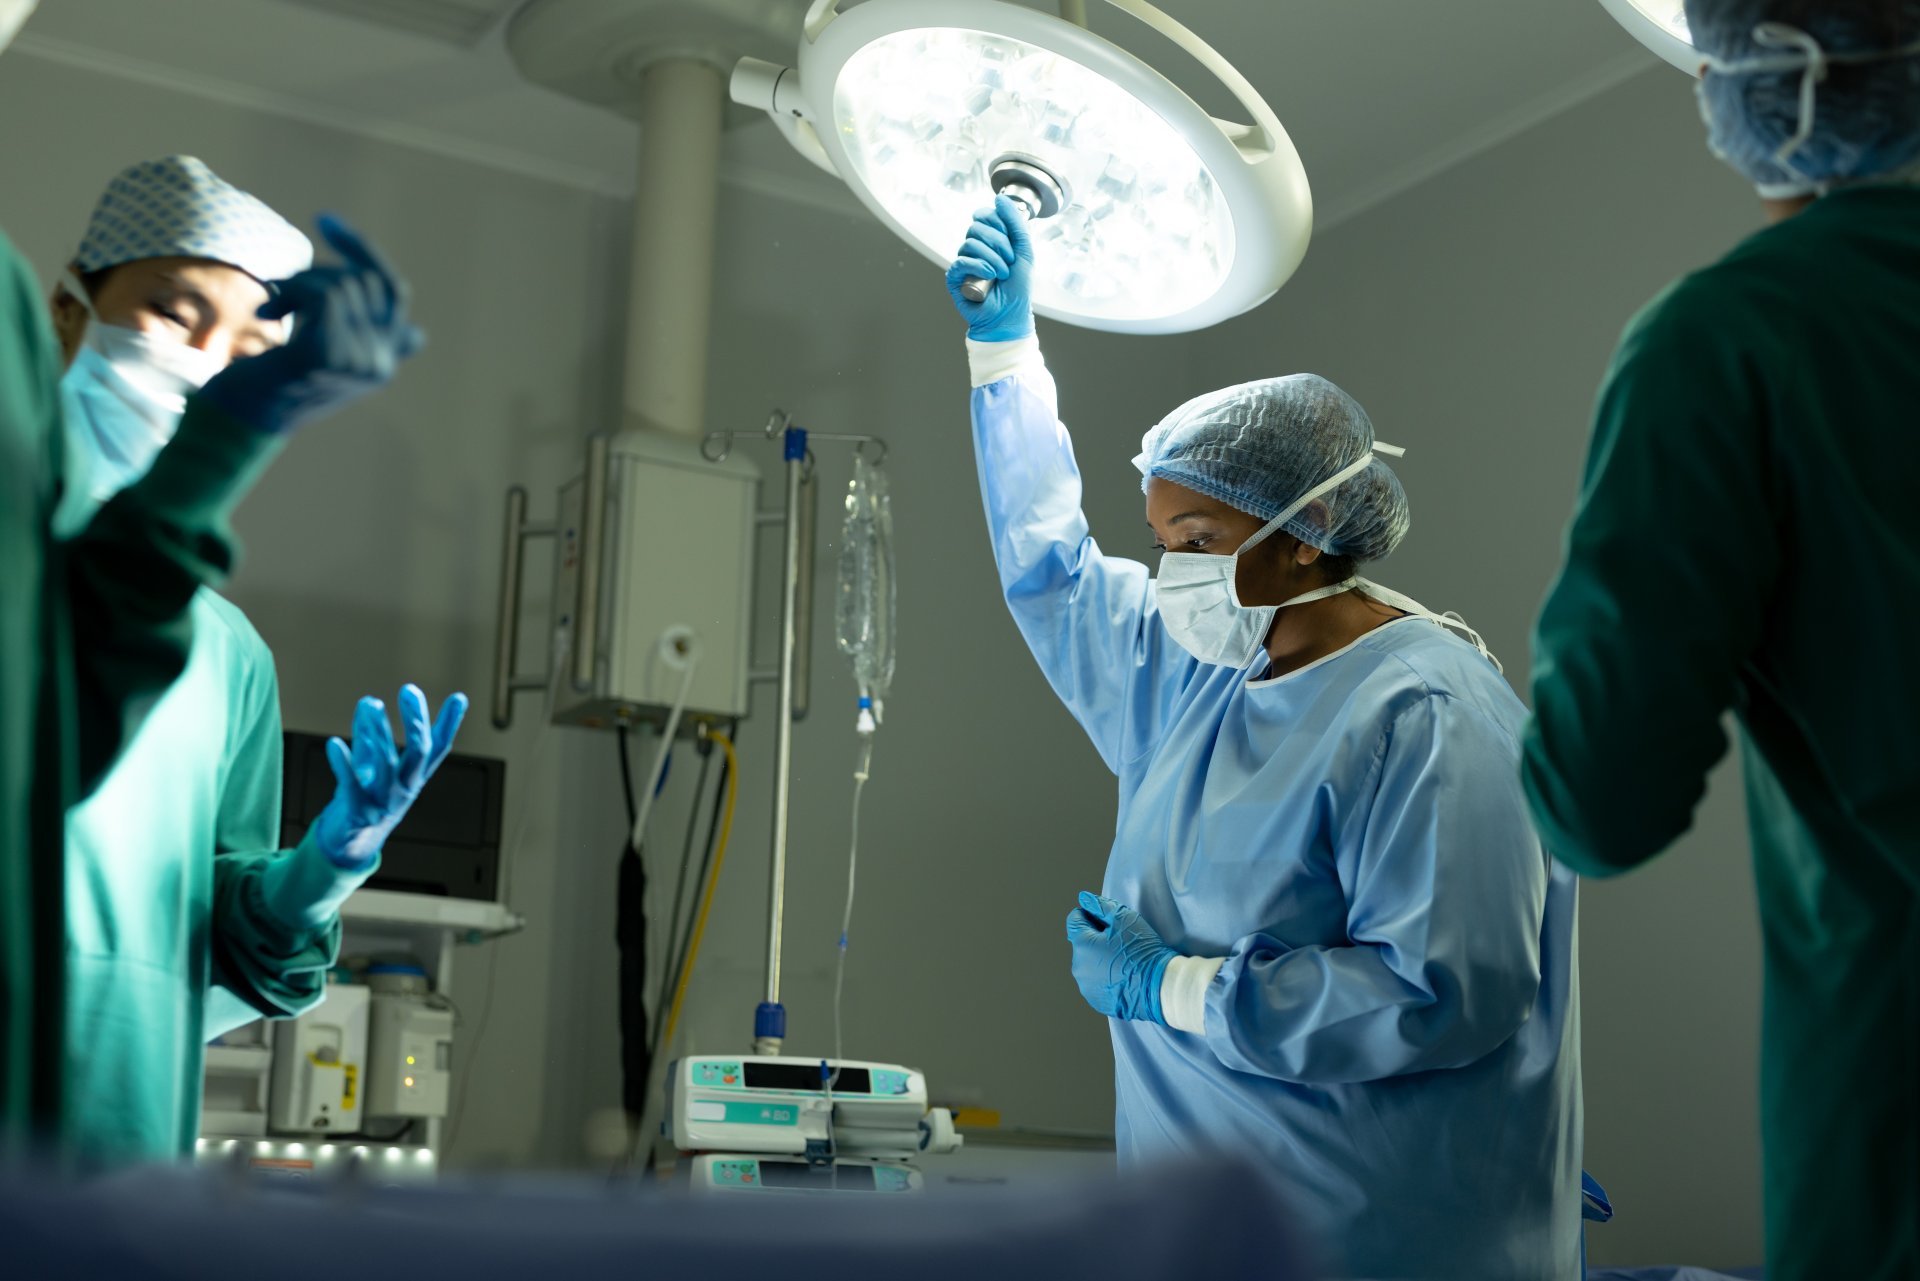 A surgical technologist adjusts an overhead light to help her team prepare for a procedure.